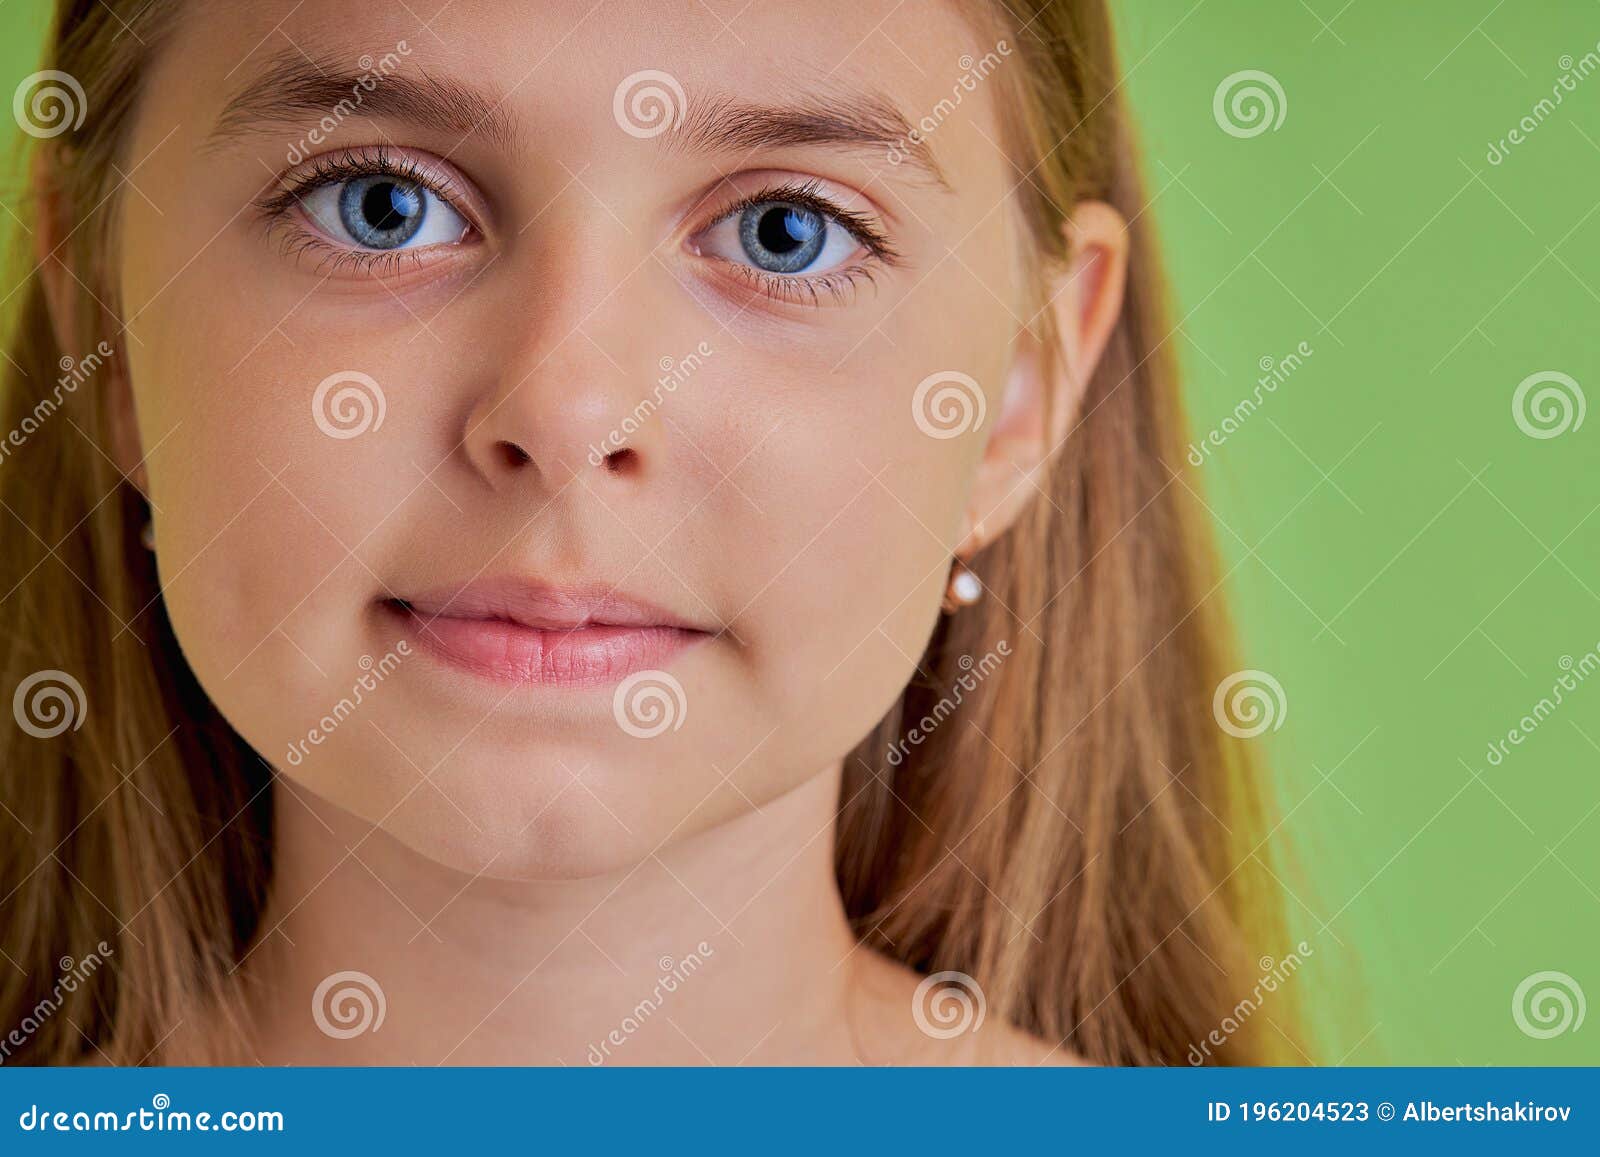 Closeup Portrait Of Shy Diligent Teen Girl Looking At Camera S